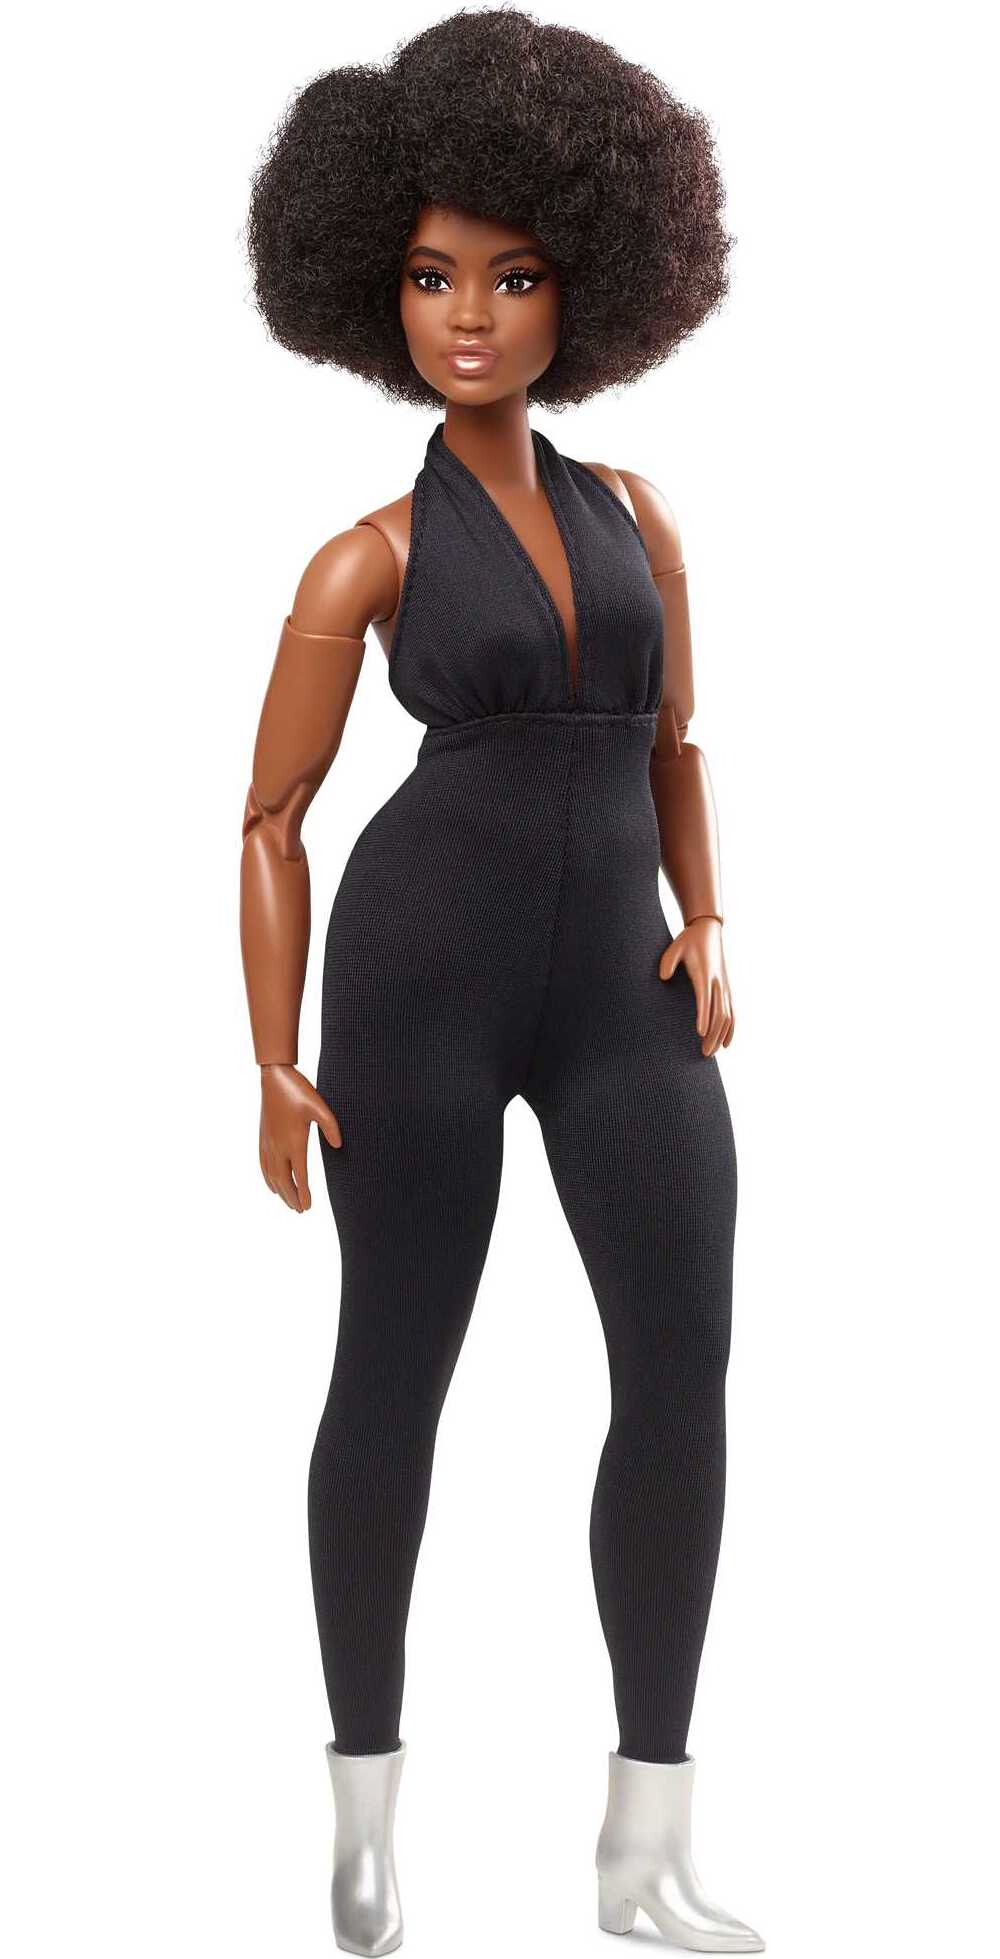 Barbie Looks Collectible Fashion Doll, Posable with Natural Hair & Black Jumpsuit - image 1 of 5